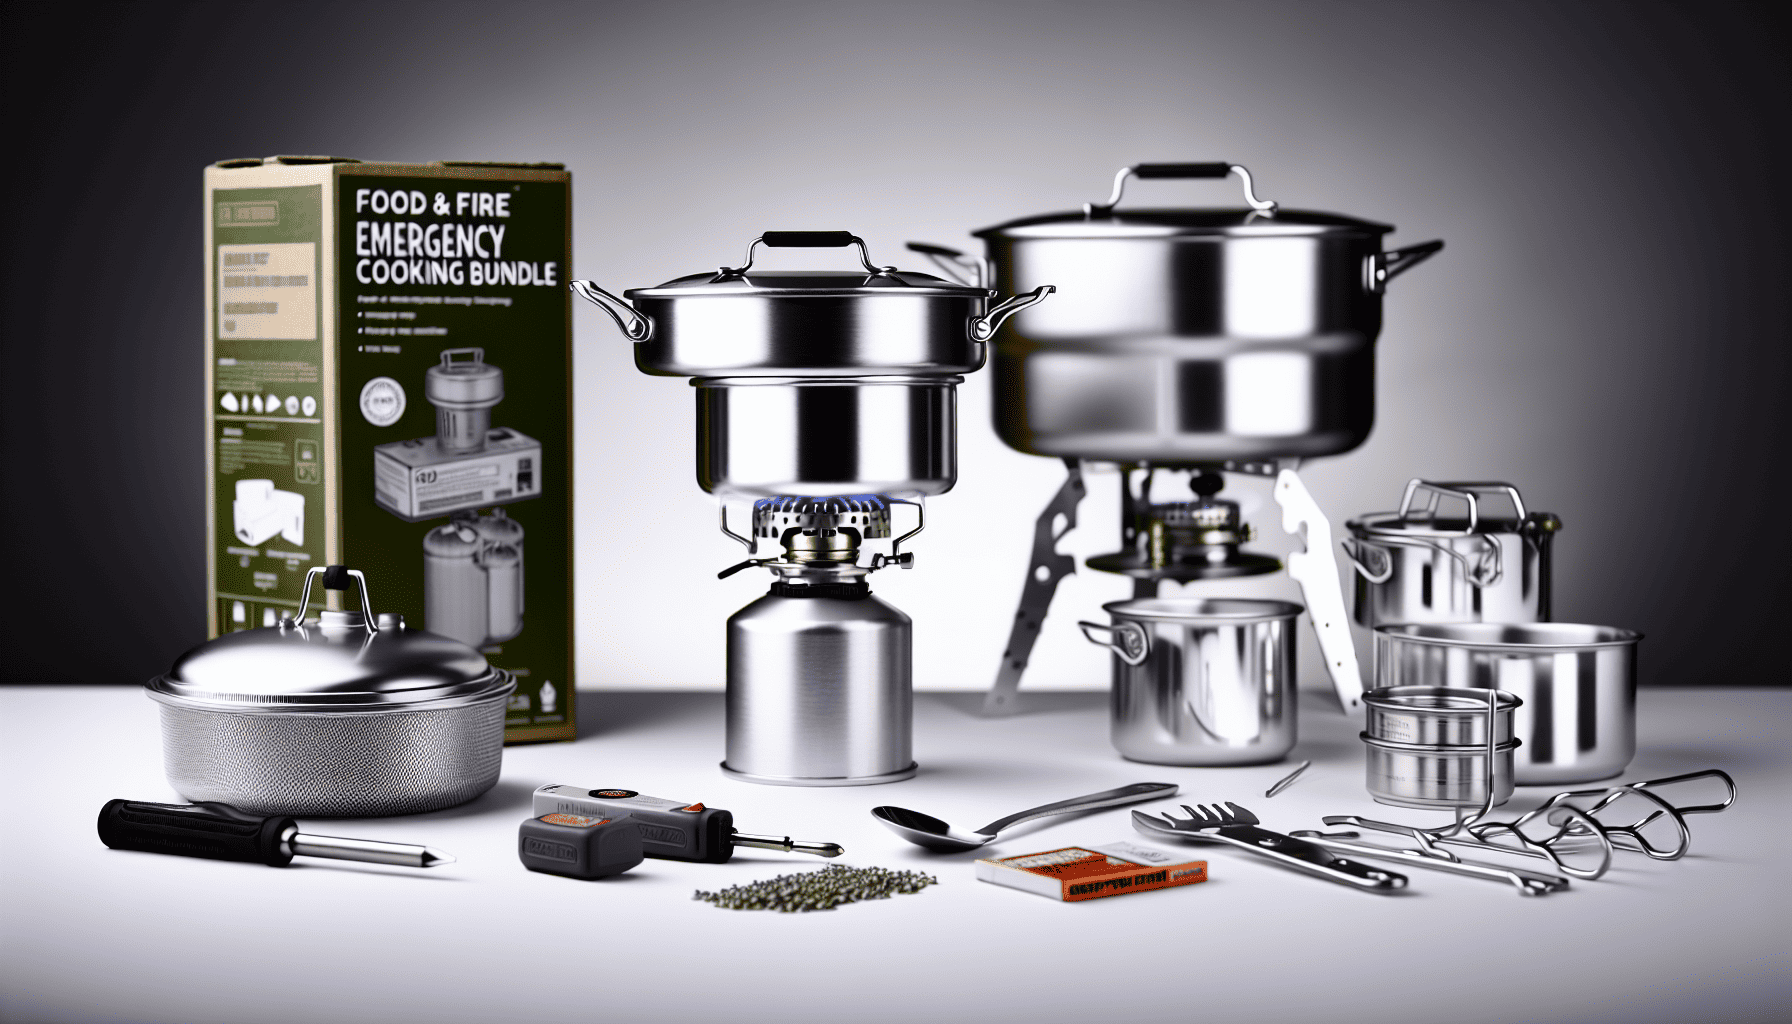 Survival food cooking bundle with portable camp stove and cookware